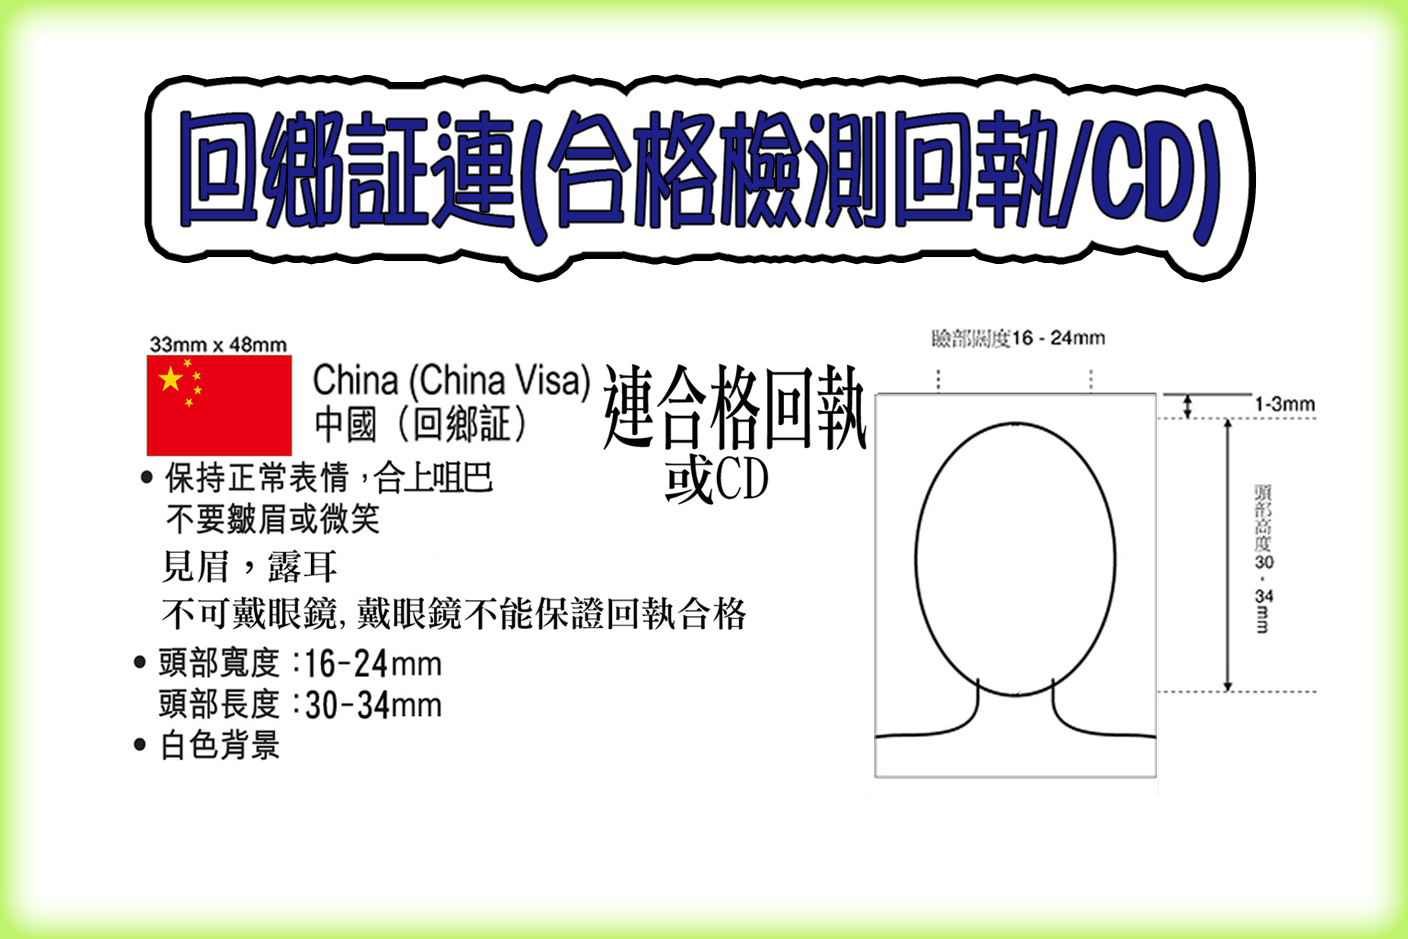 China Permit (A receipt or CD will be provided for local Chinese applicant)